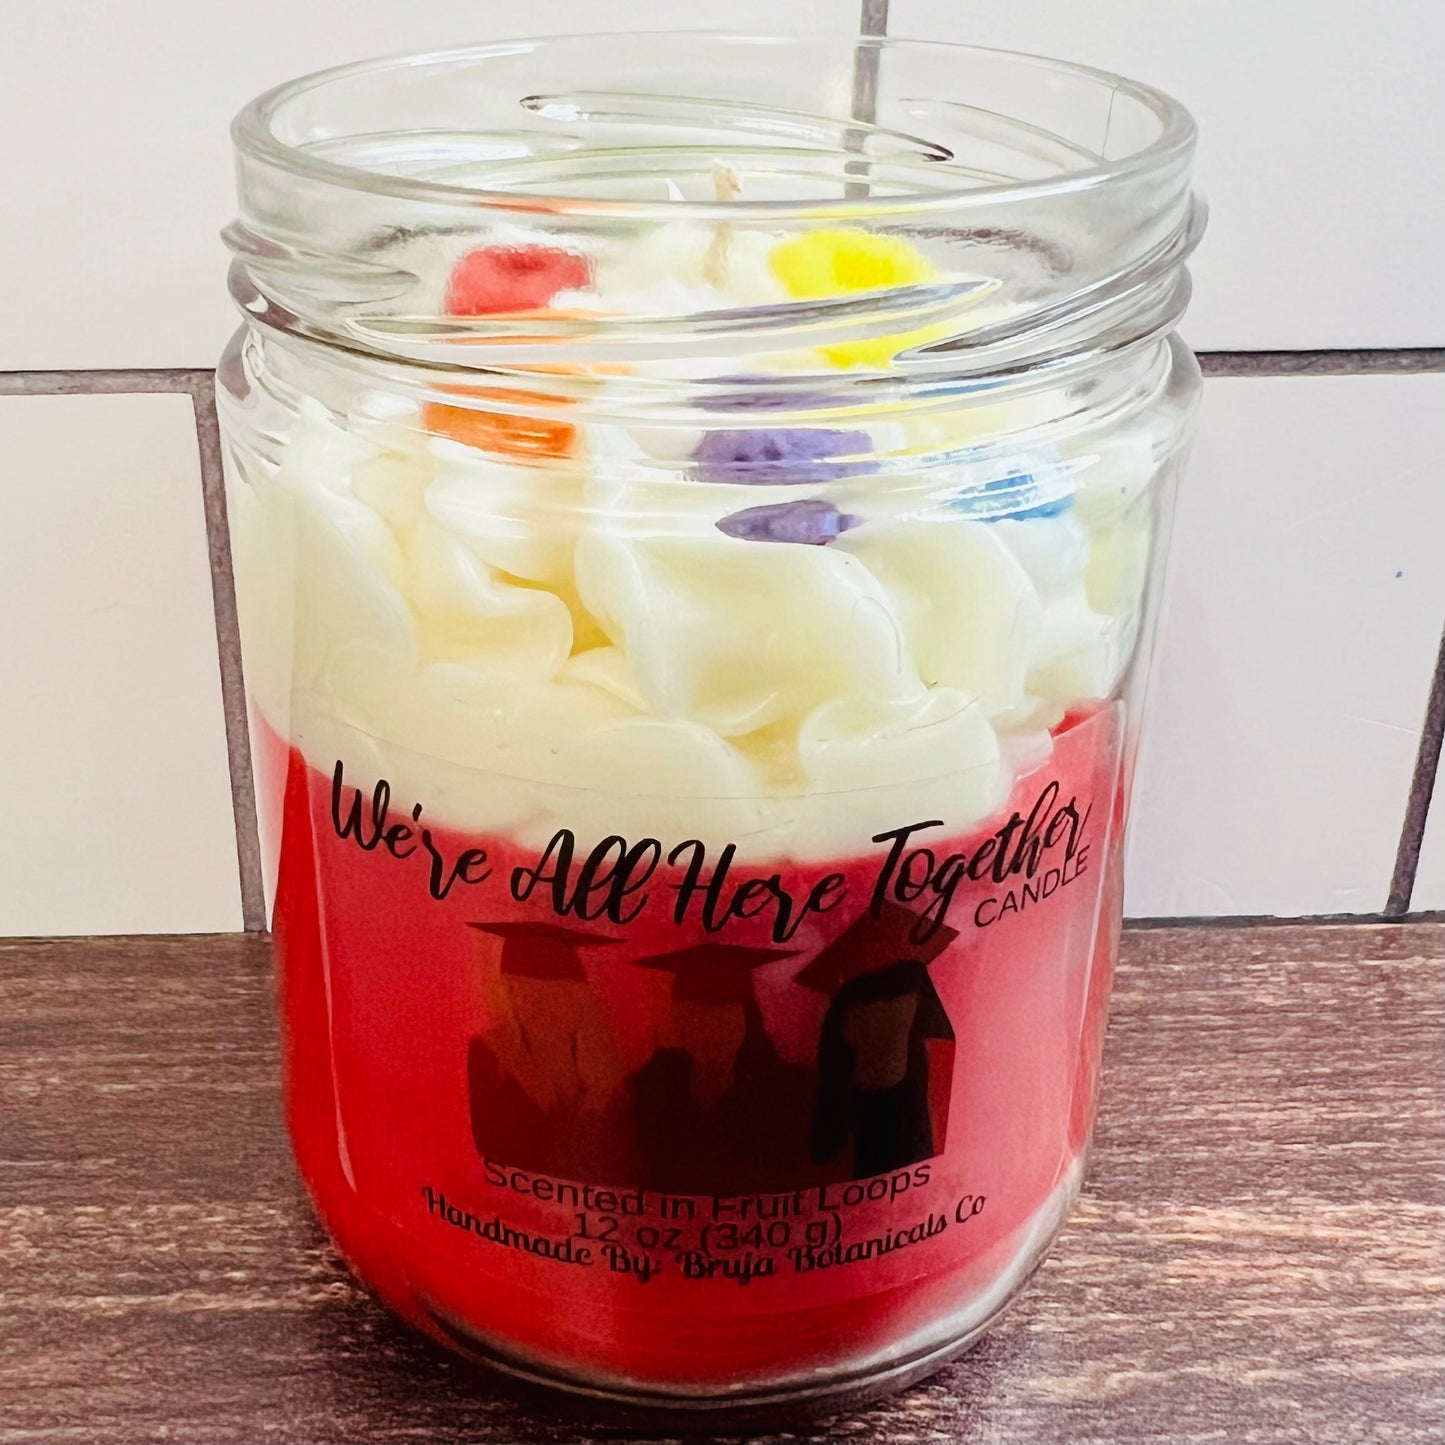 We're All Here Together Whipped Candle (TVD inspired)